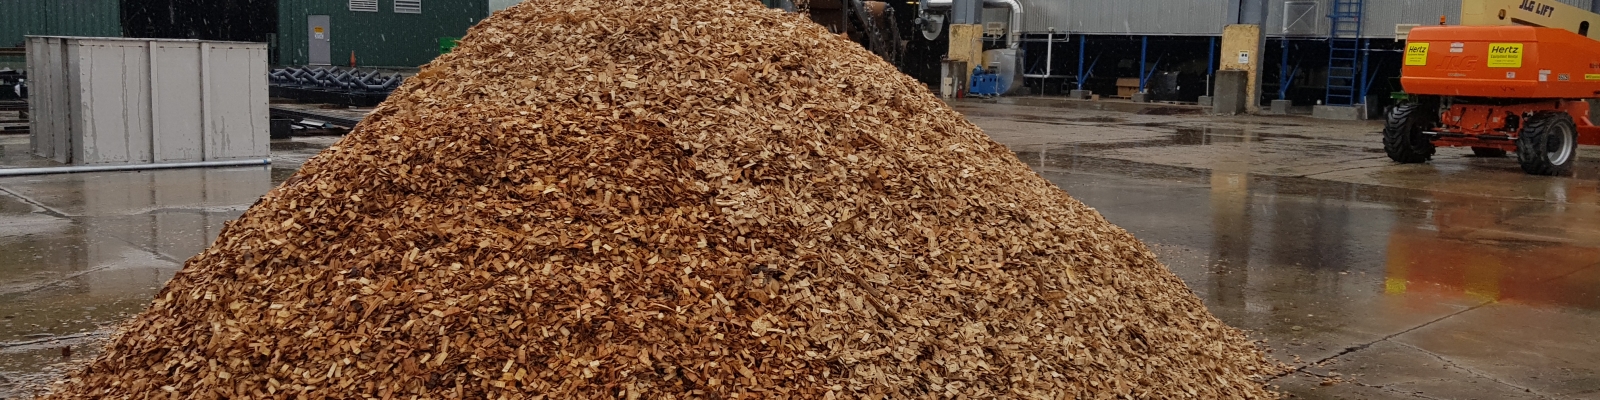 Production of dried wood chips